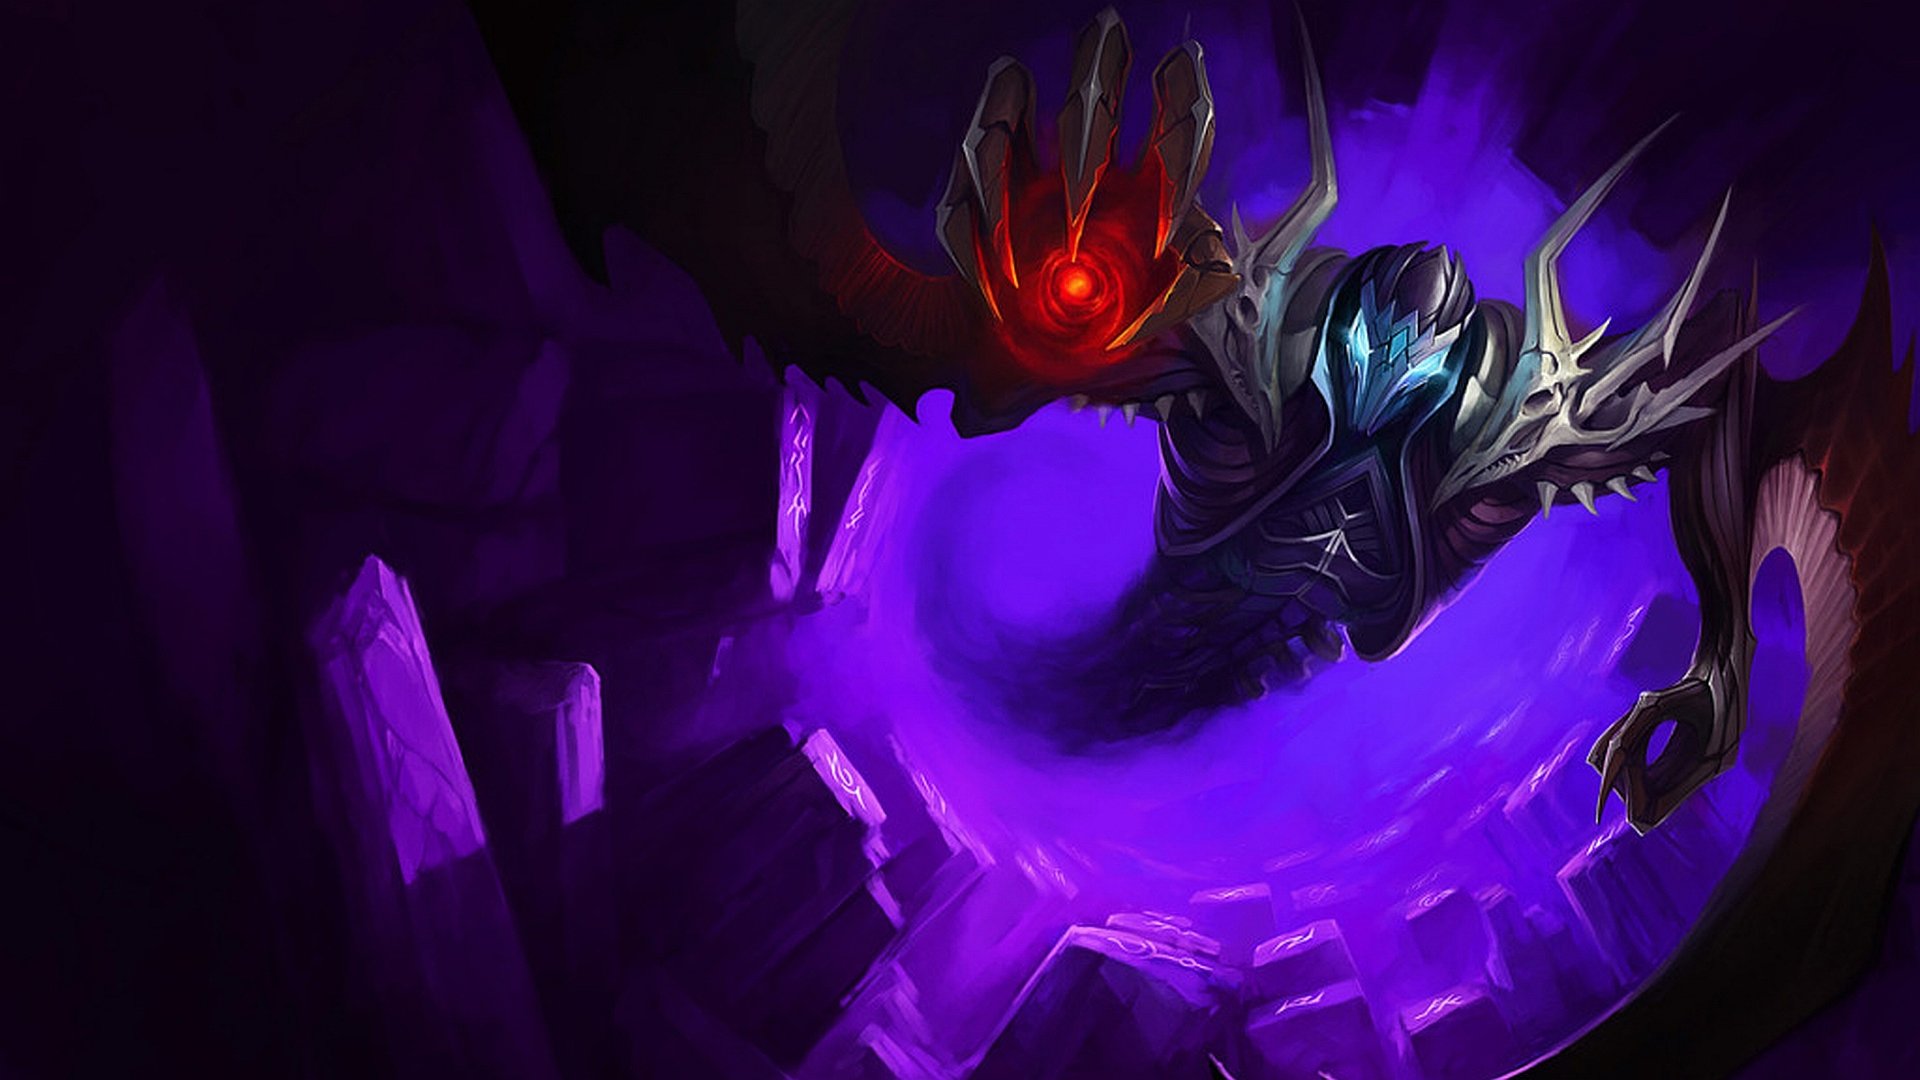 Download full hd 1920x1080 Nocturne (League Of Legends) desktop background ID:172907 for free